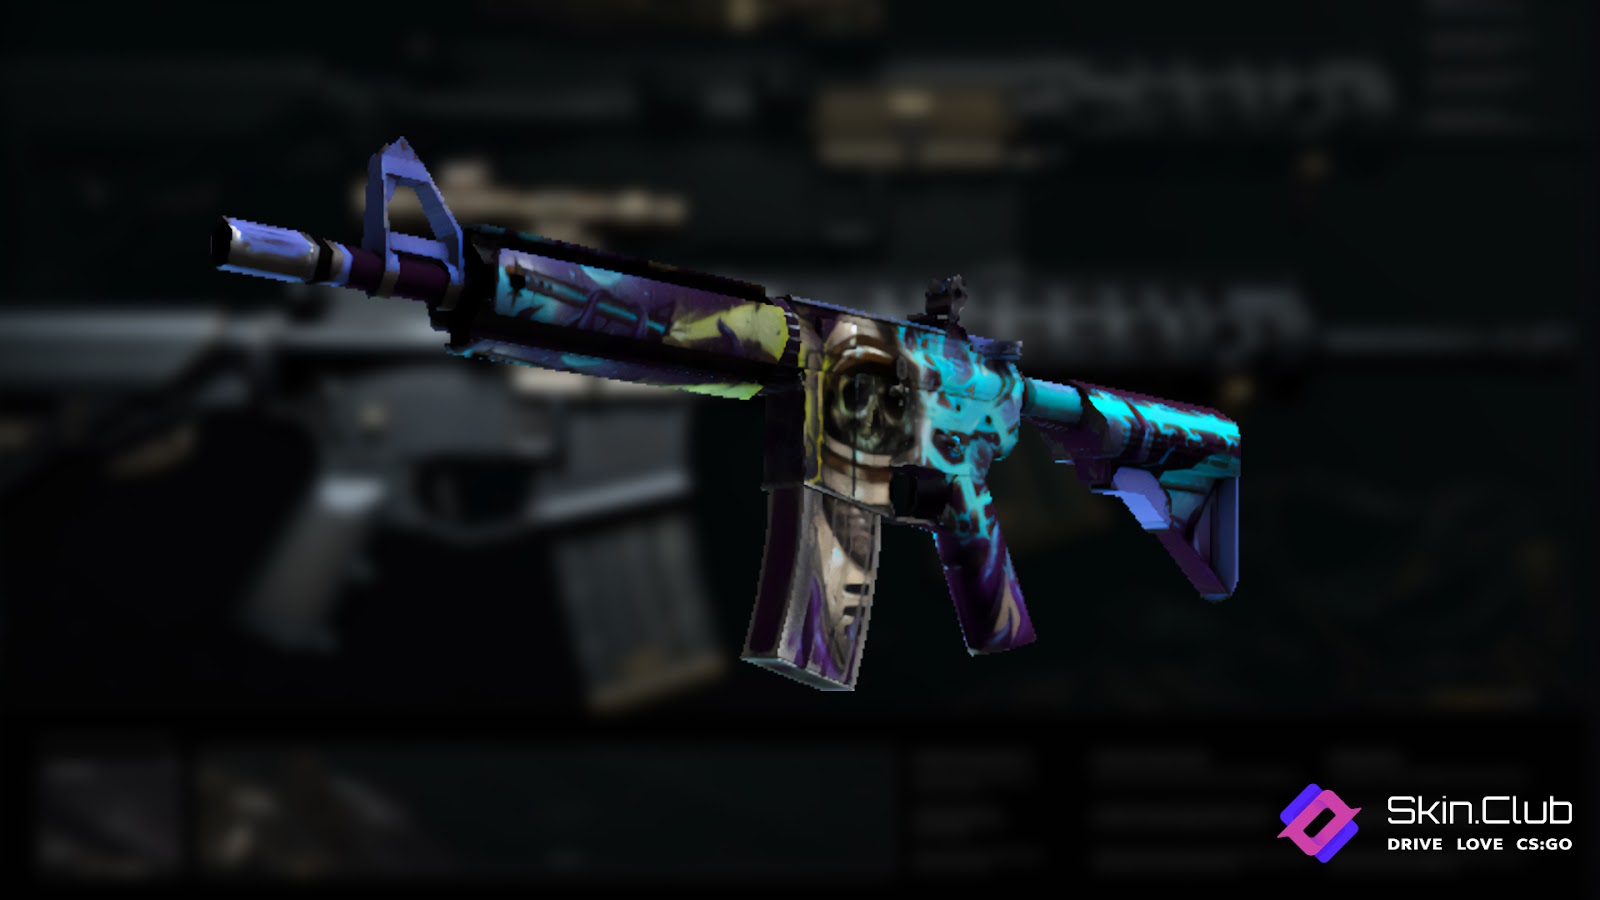 Rent CS:GO Skins: A New Trend in the Skins Market?